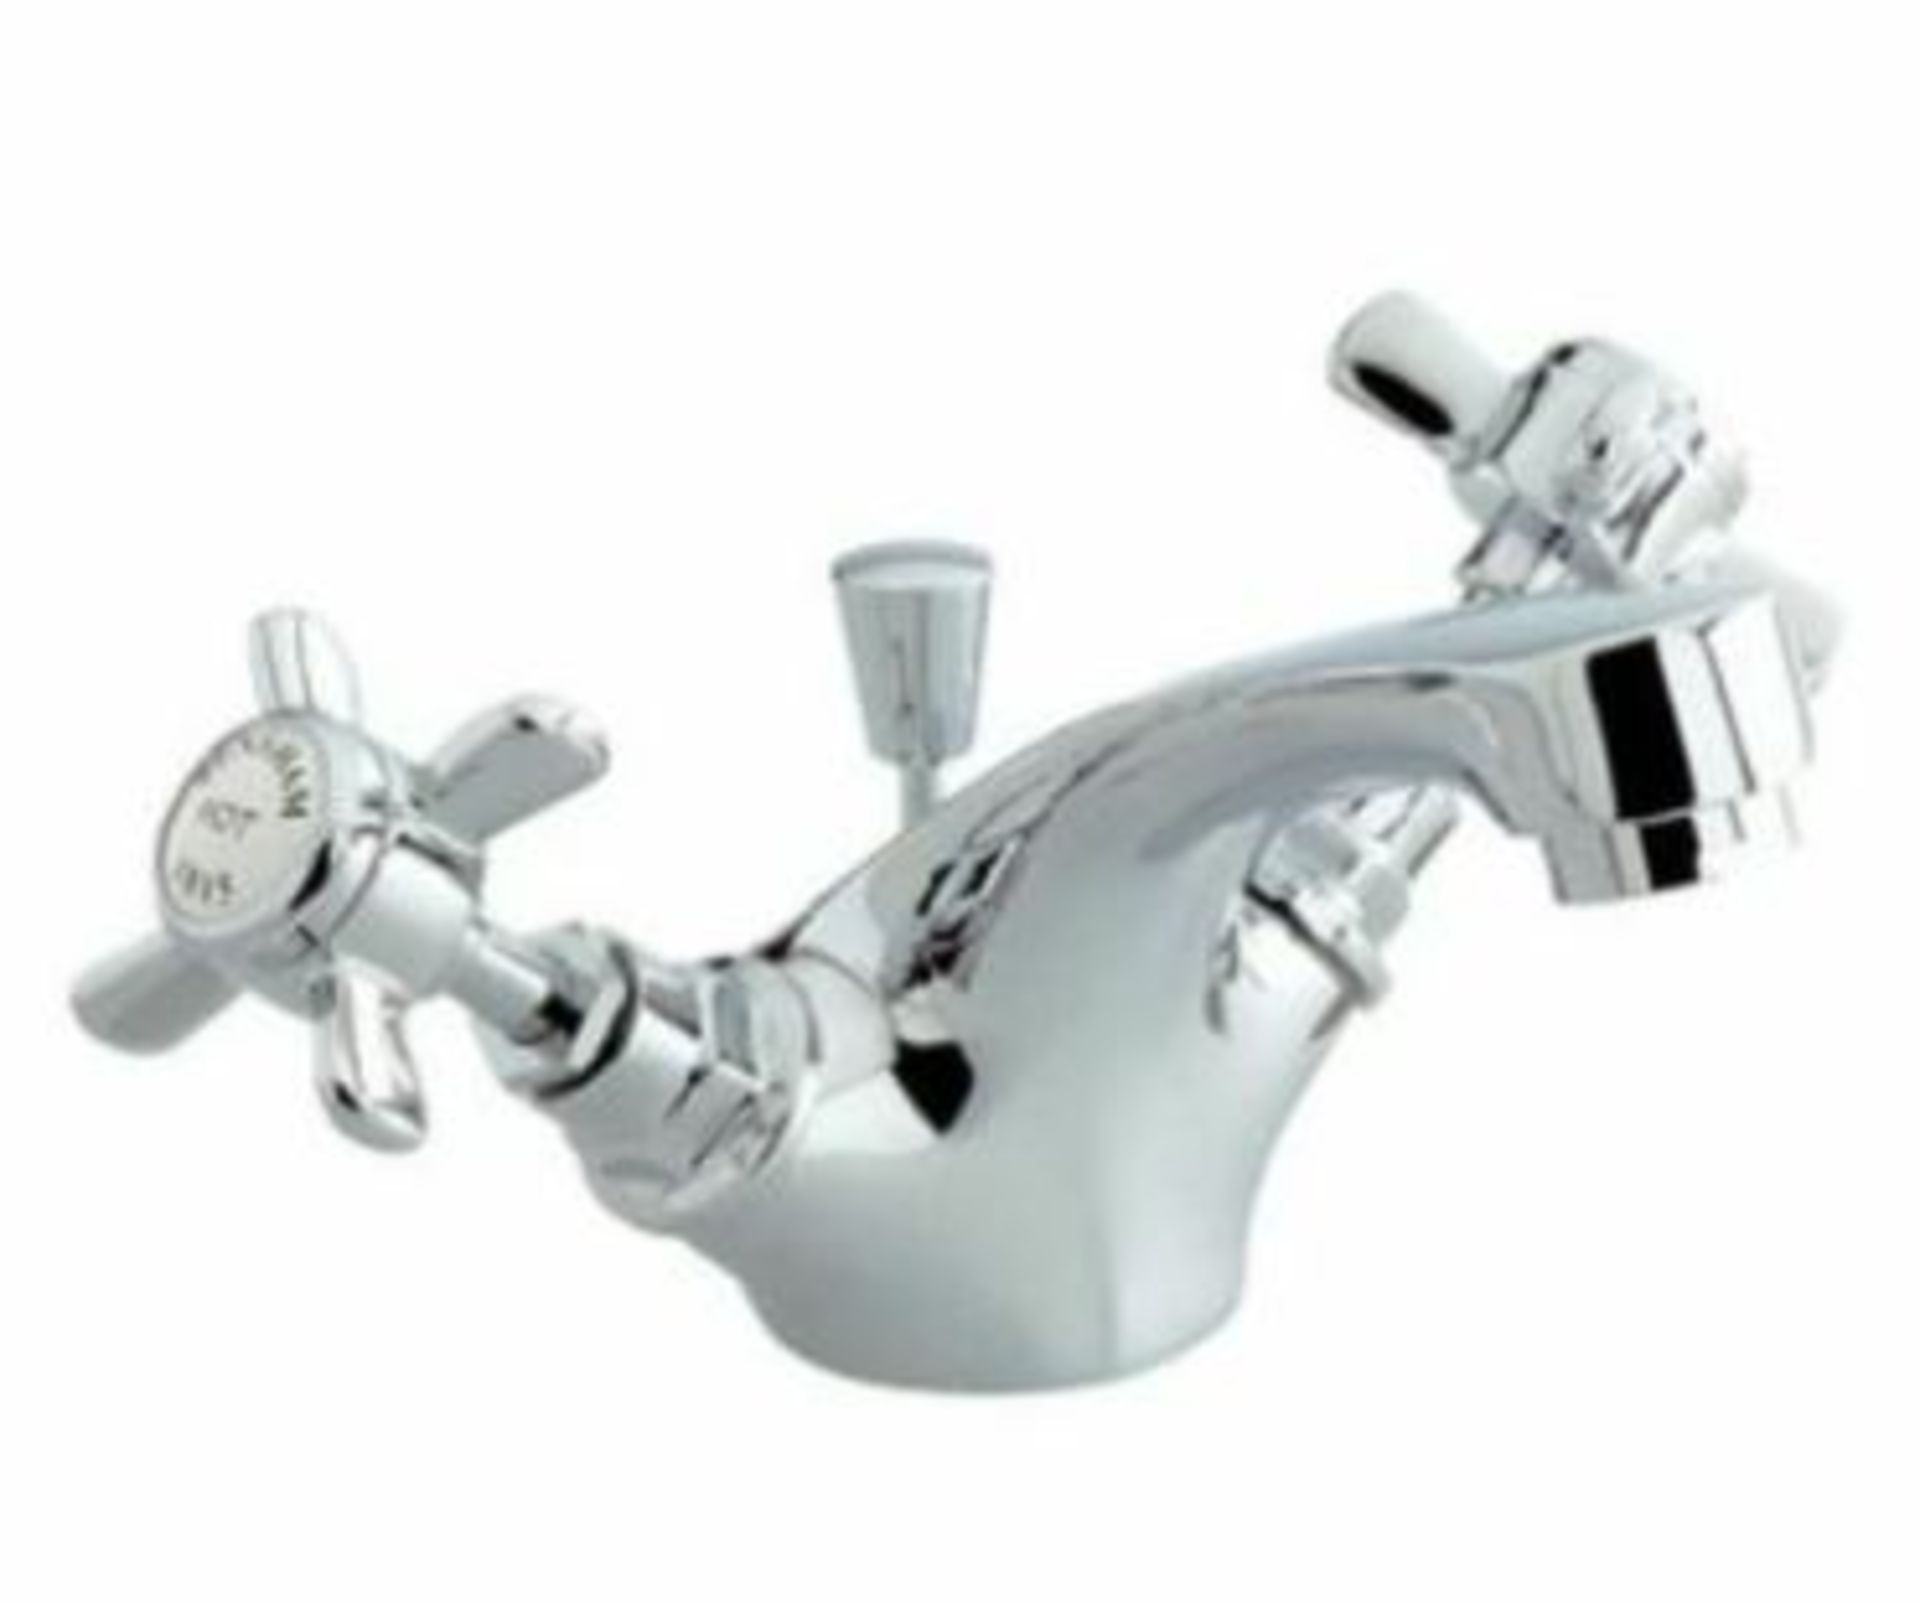 Bathstore Bensham Traditional Luxury Mono Basin Mixer Tap With Ceramic Hot / Cold End Caps & Pop Up